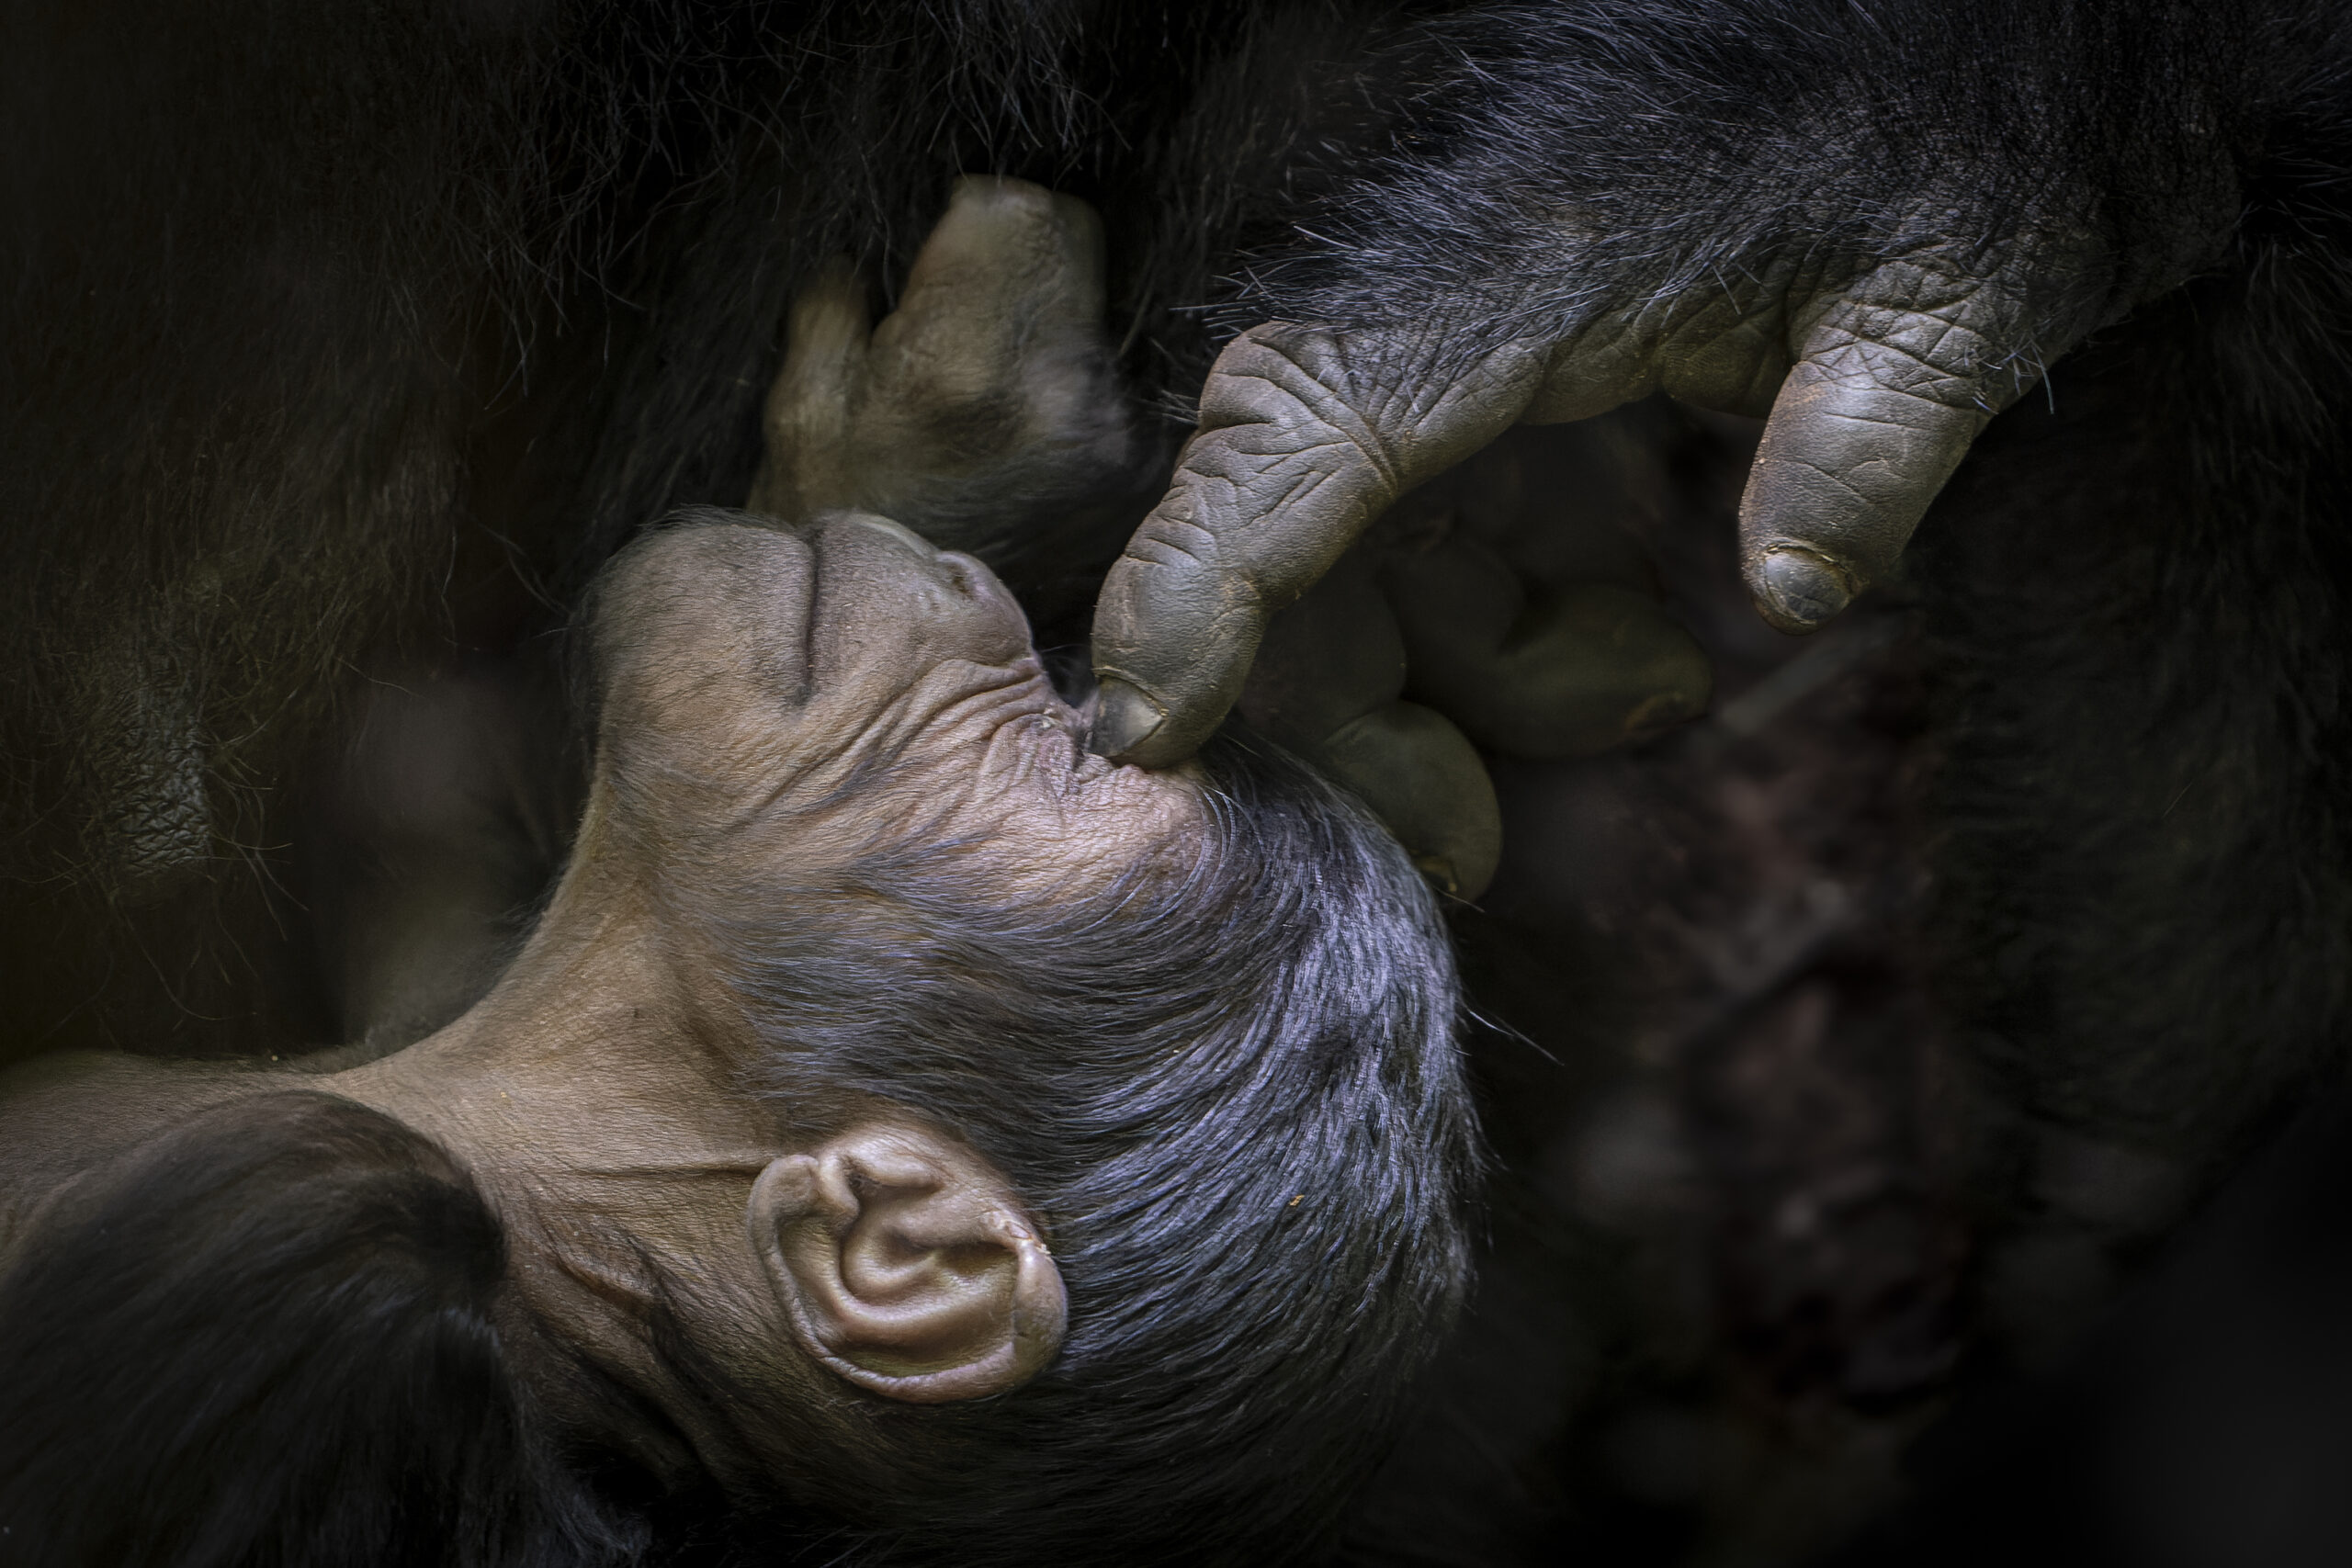 Photographer of the Year Touch by Tomasz Szpila scaled